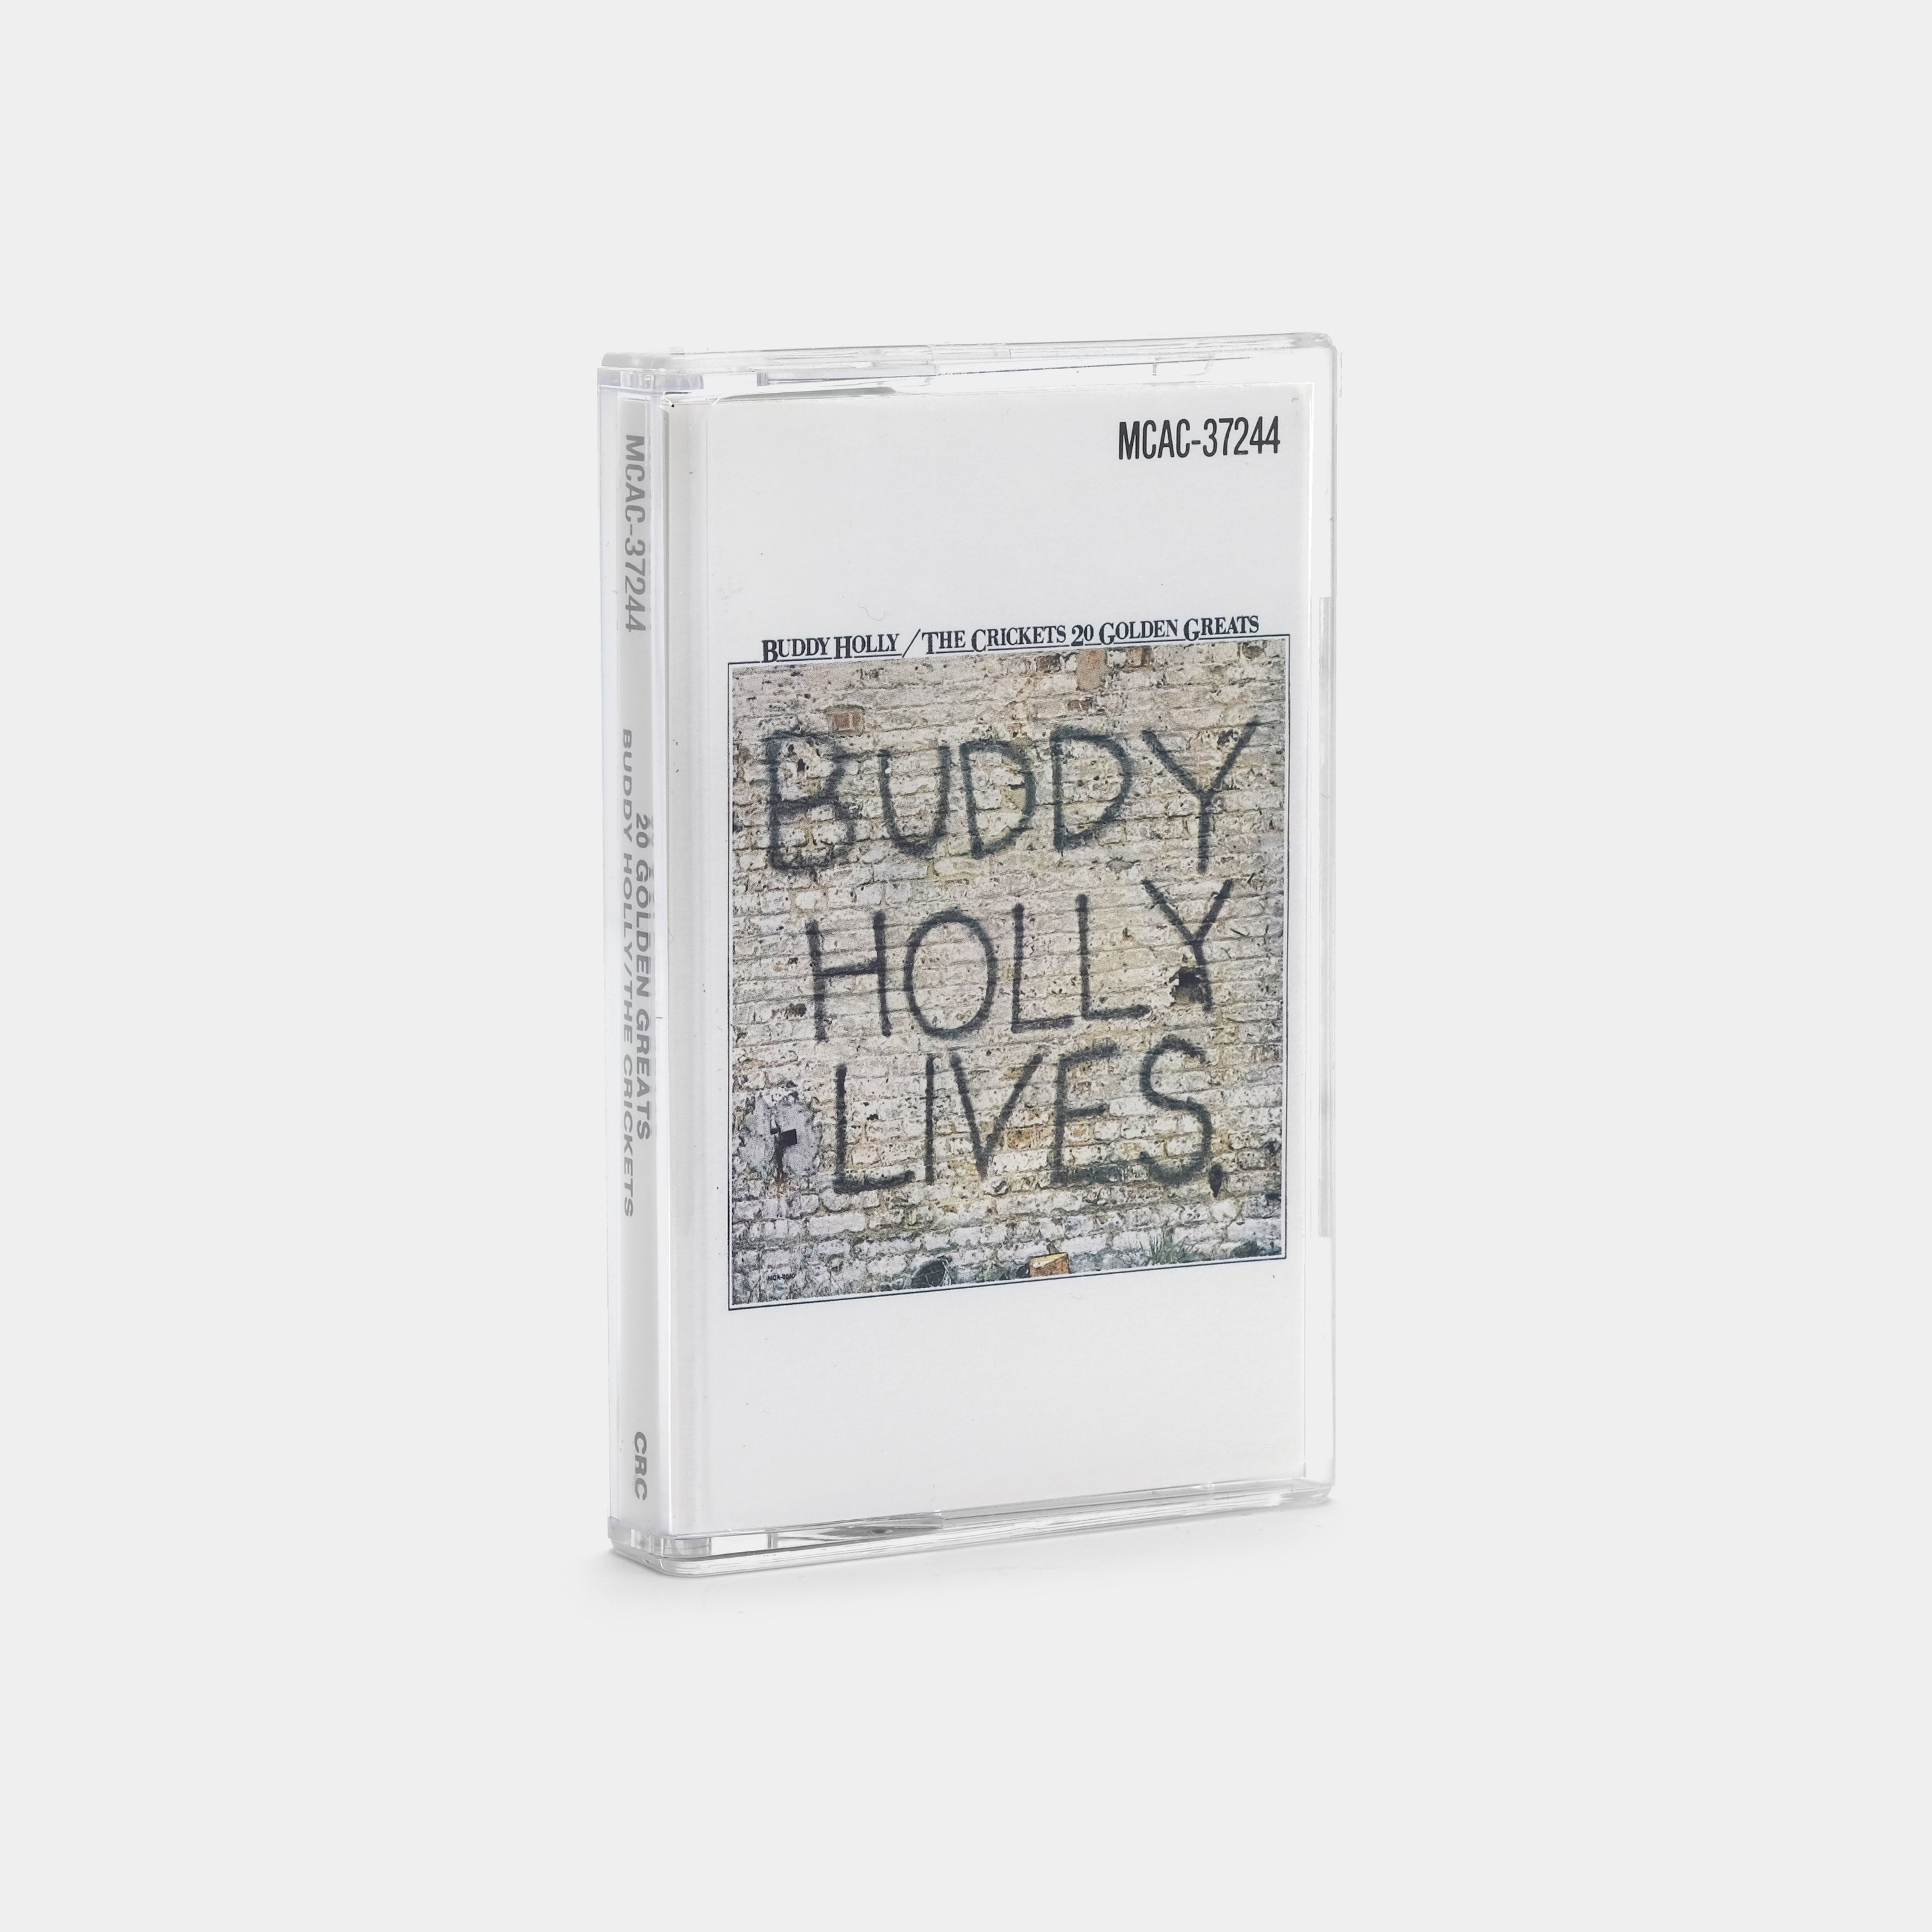 Buddy Holly / The Crickets - 20 Golden Greats Cassette Tape